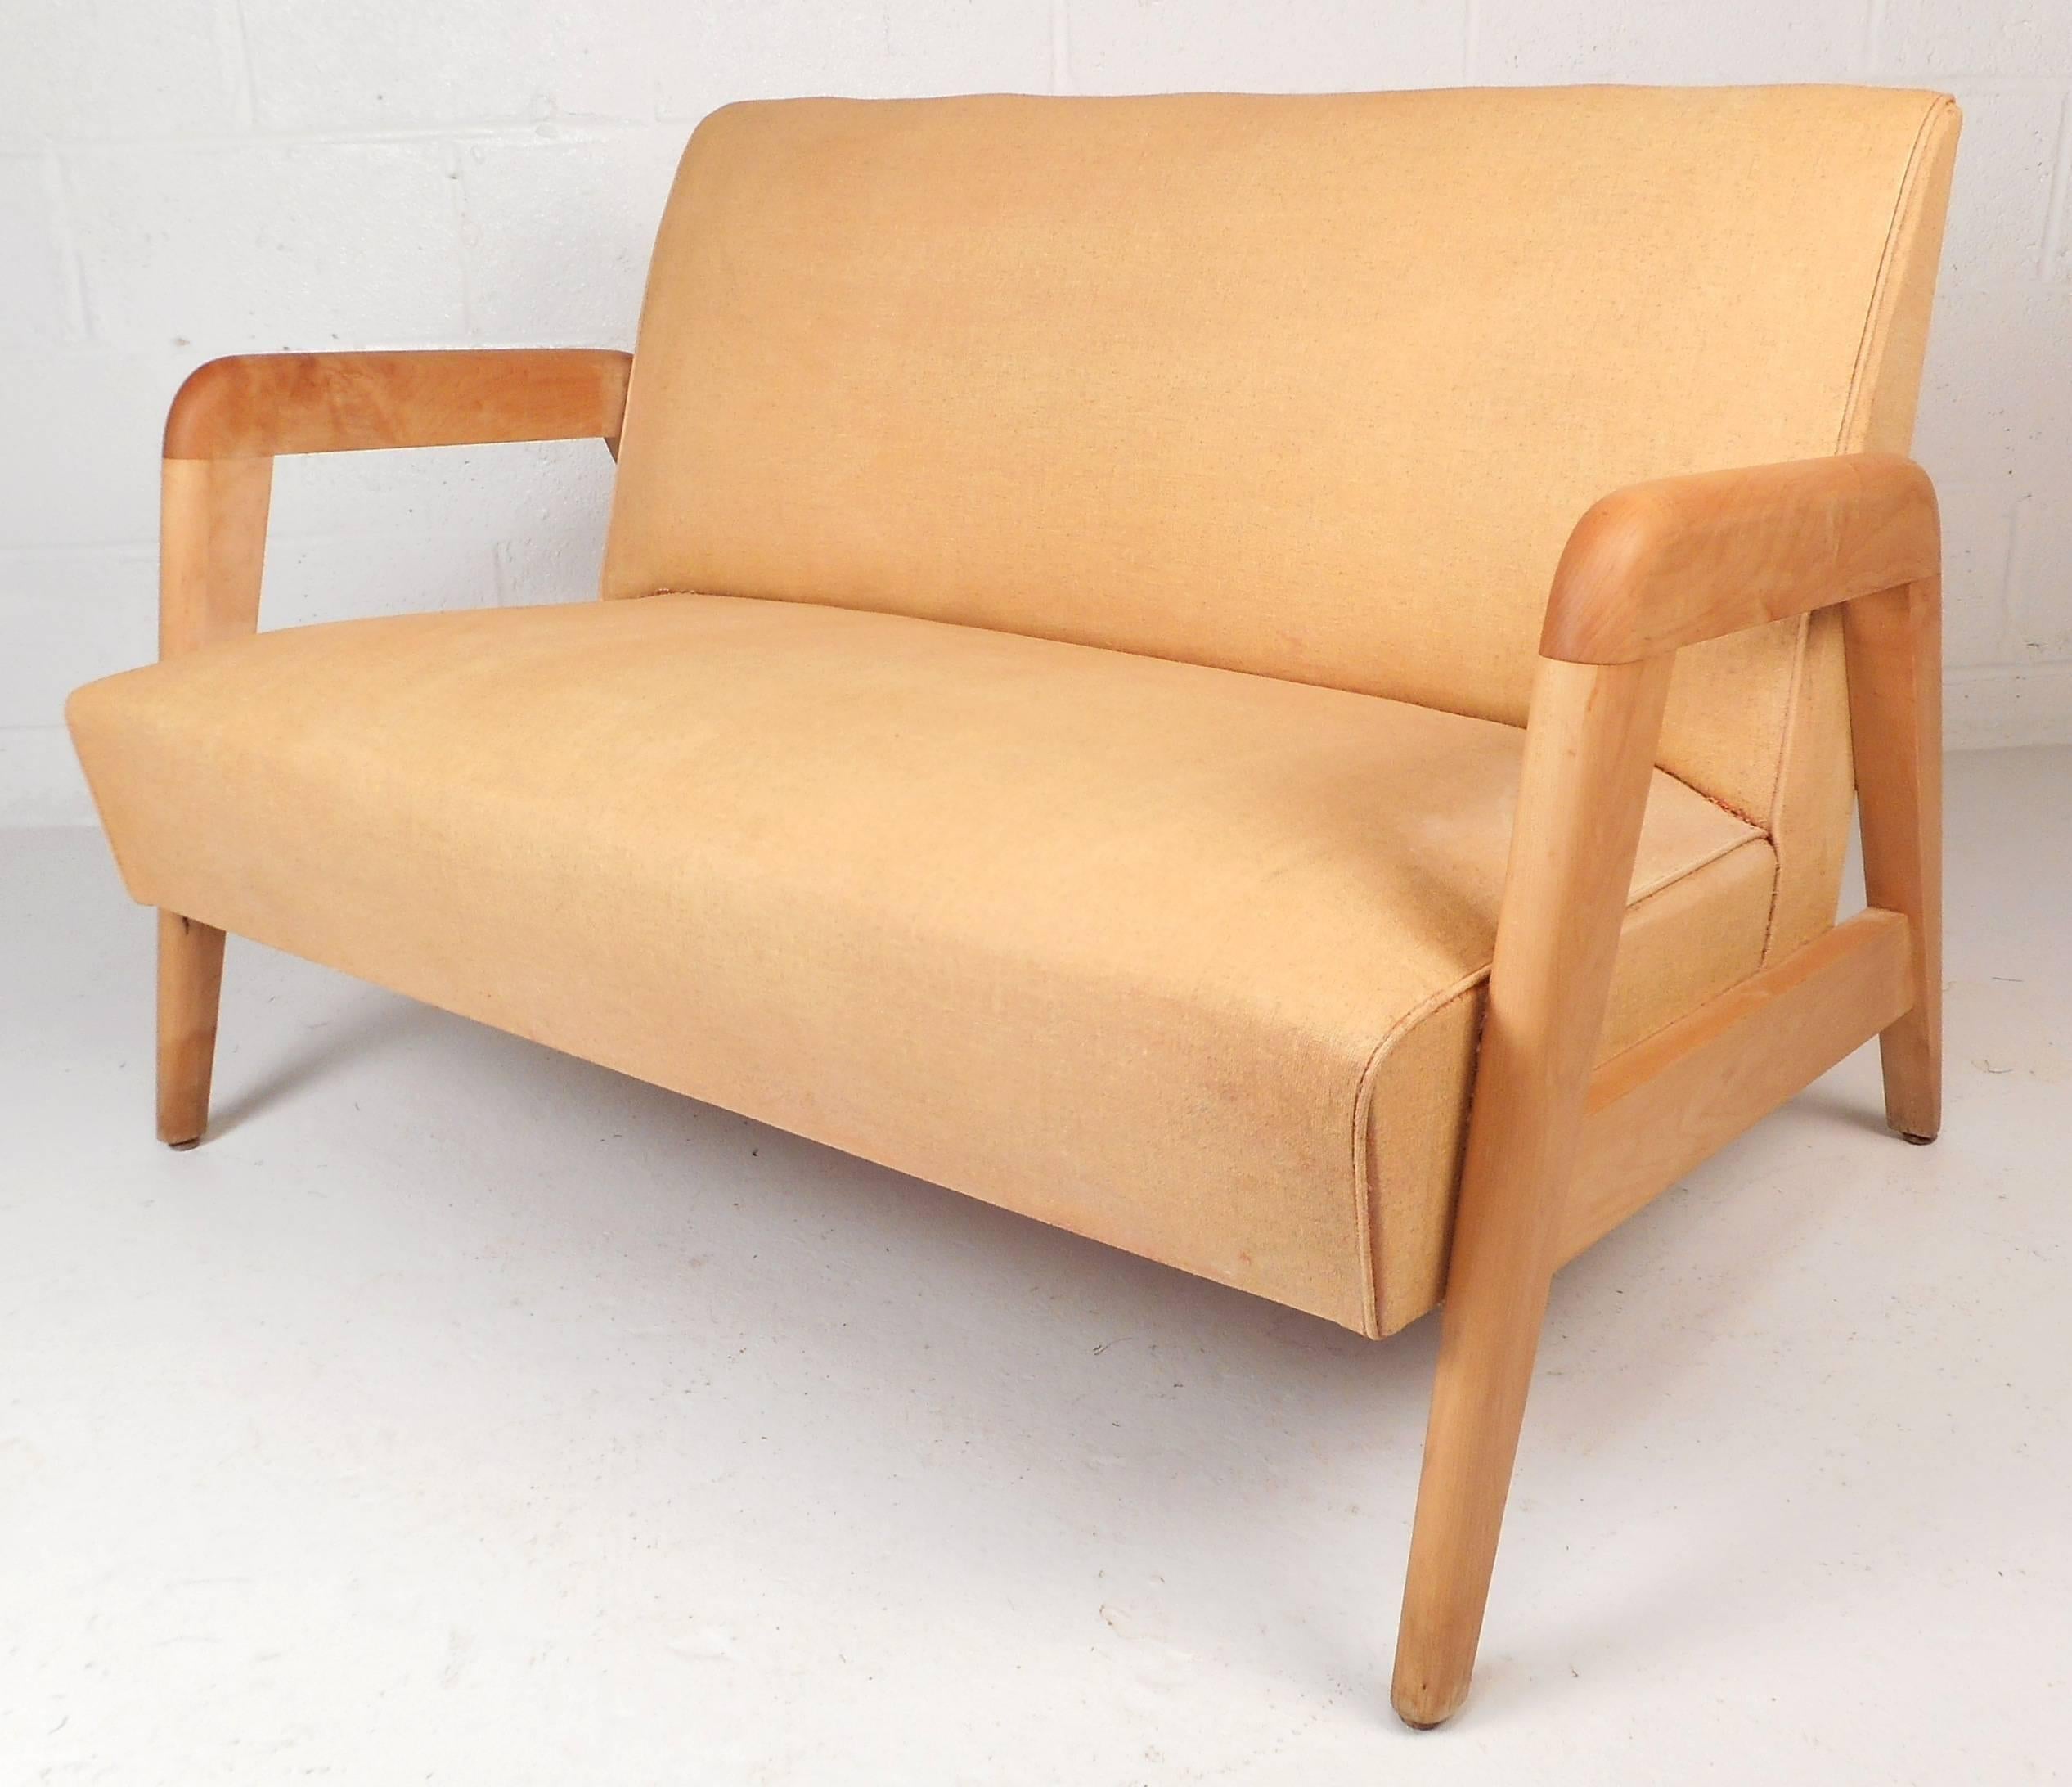 Stunning set of three vintage modern chairs feature two lounge chairs and one settee by Leslie Diamond for Conant Ball. Elegant design with smooth edges on the arm rests and unique angled legs. Solid maple frame and well-padded seats make them the